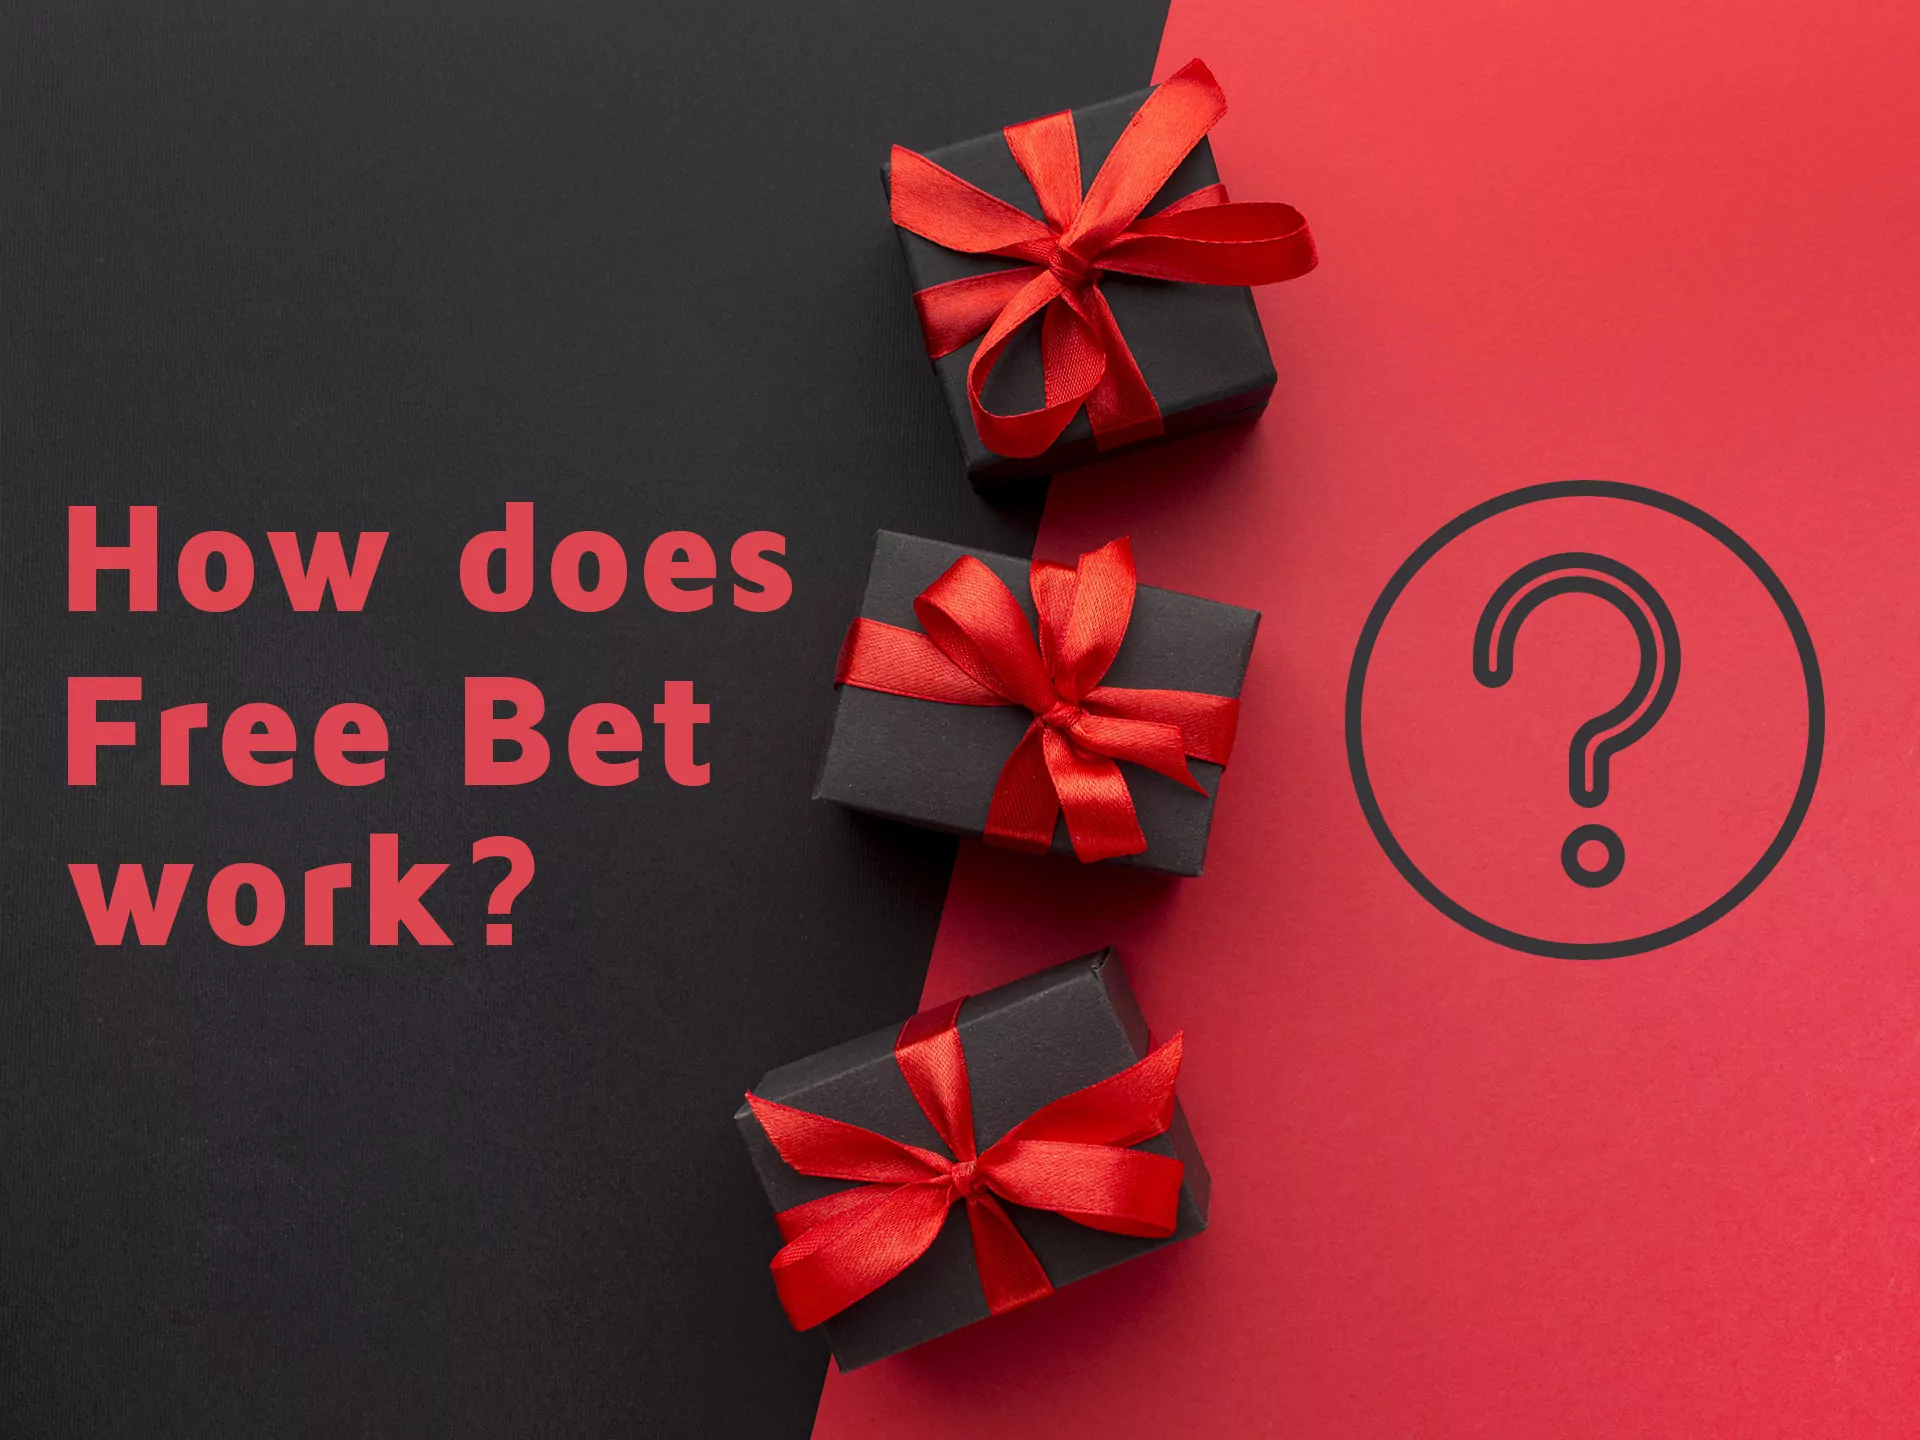 After sign-up and first bet, you can earn free bet.